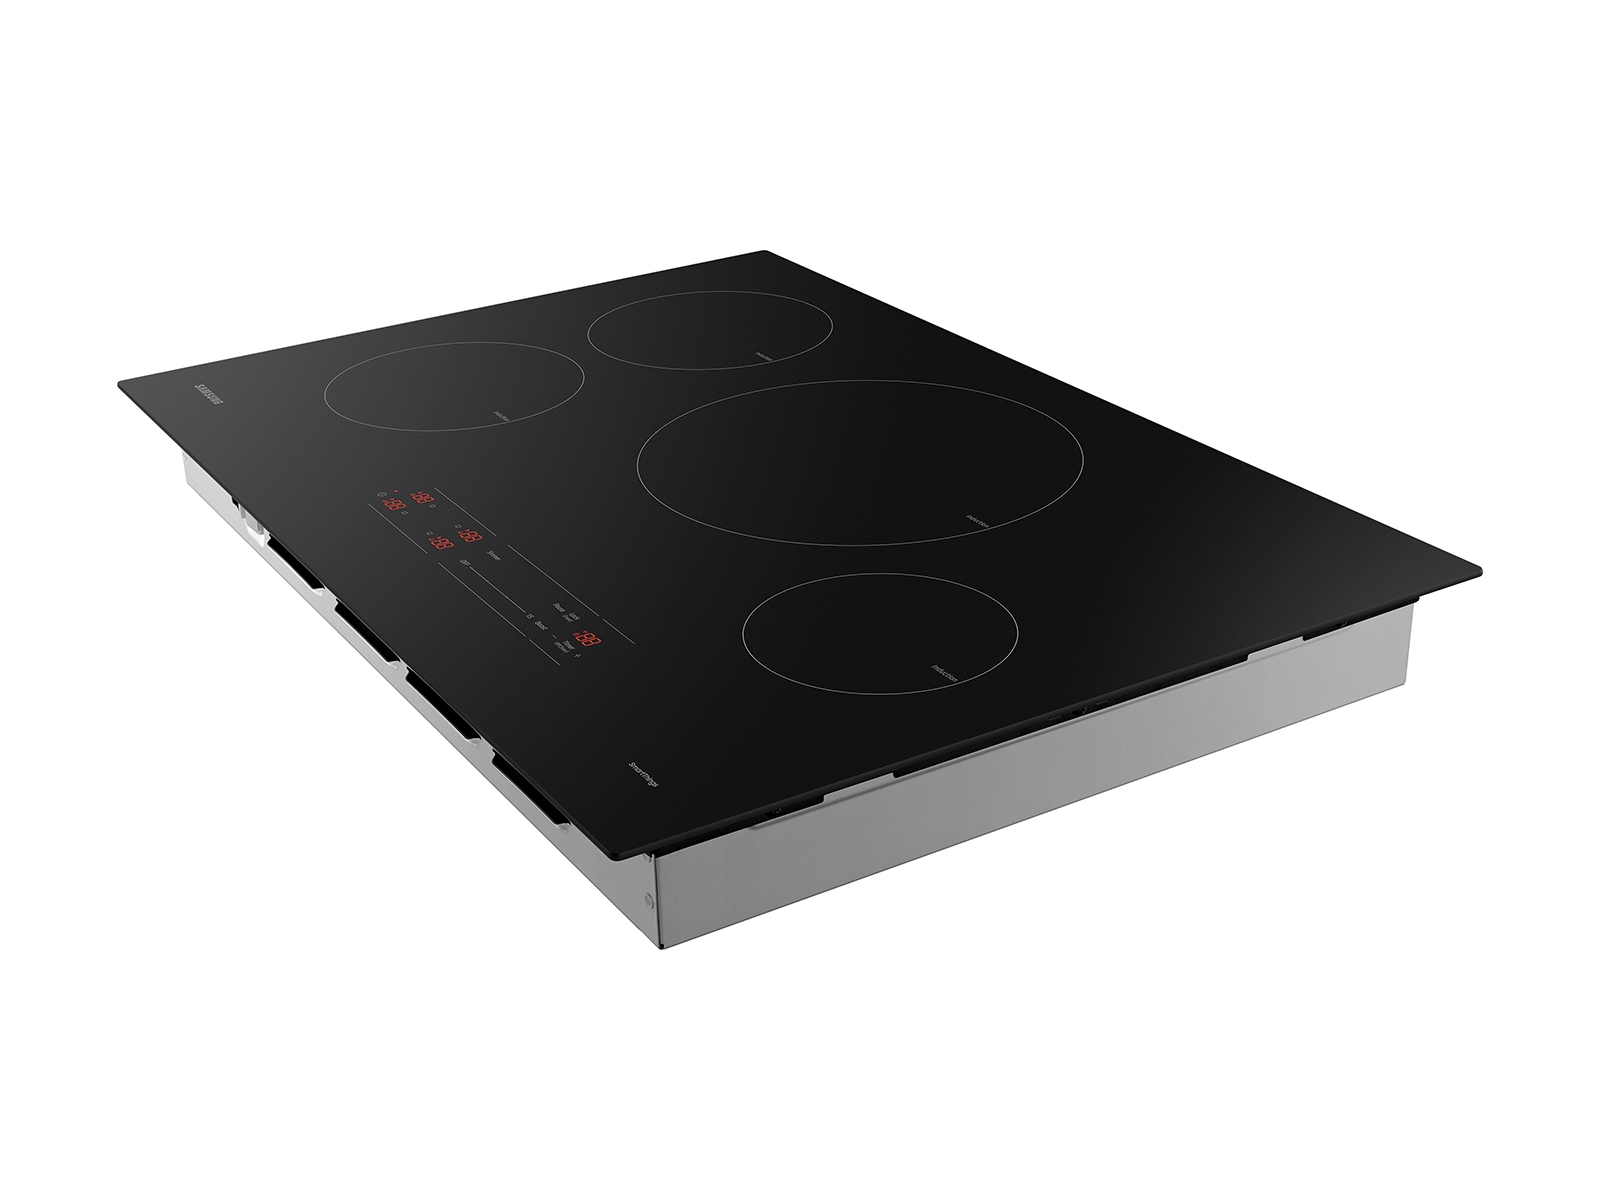 30 Smart Induction Cooktop in Black